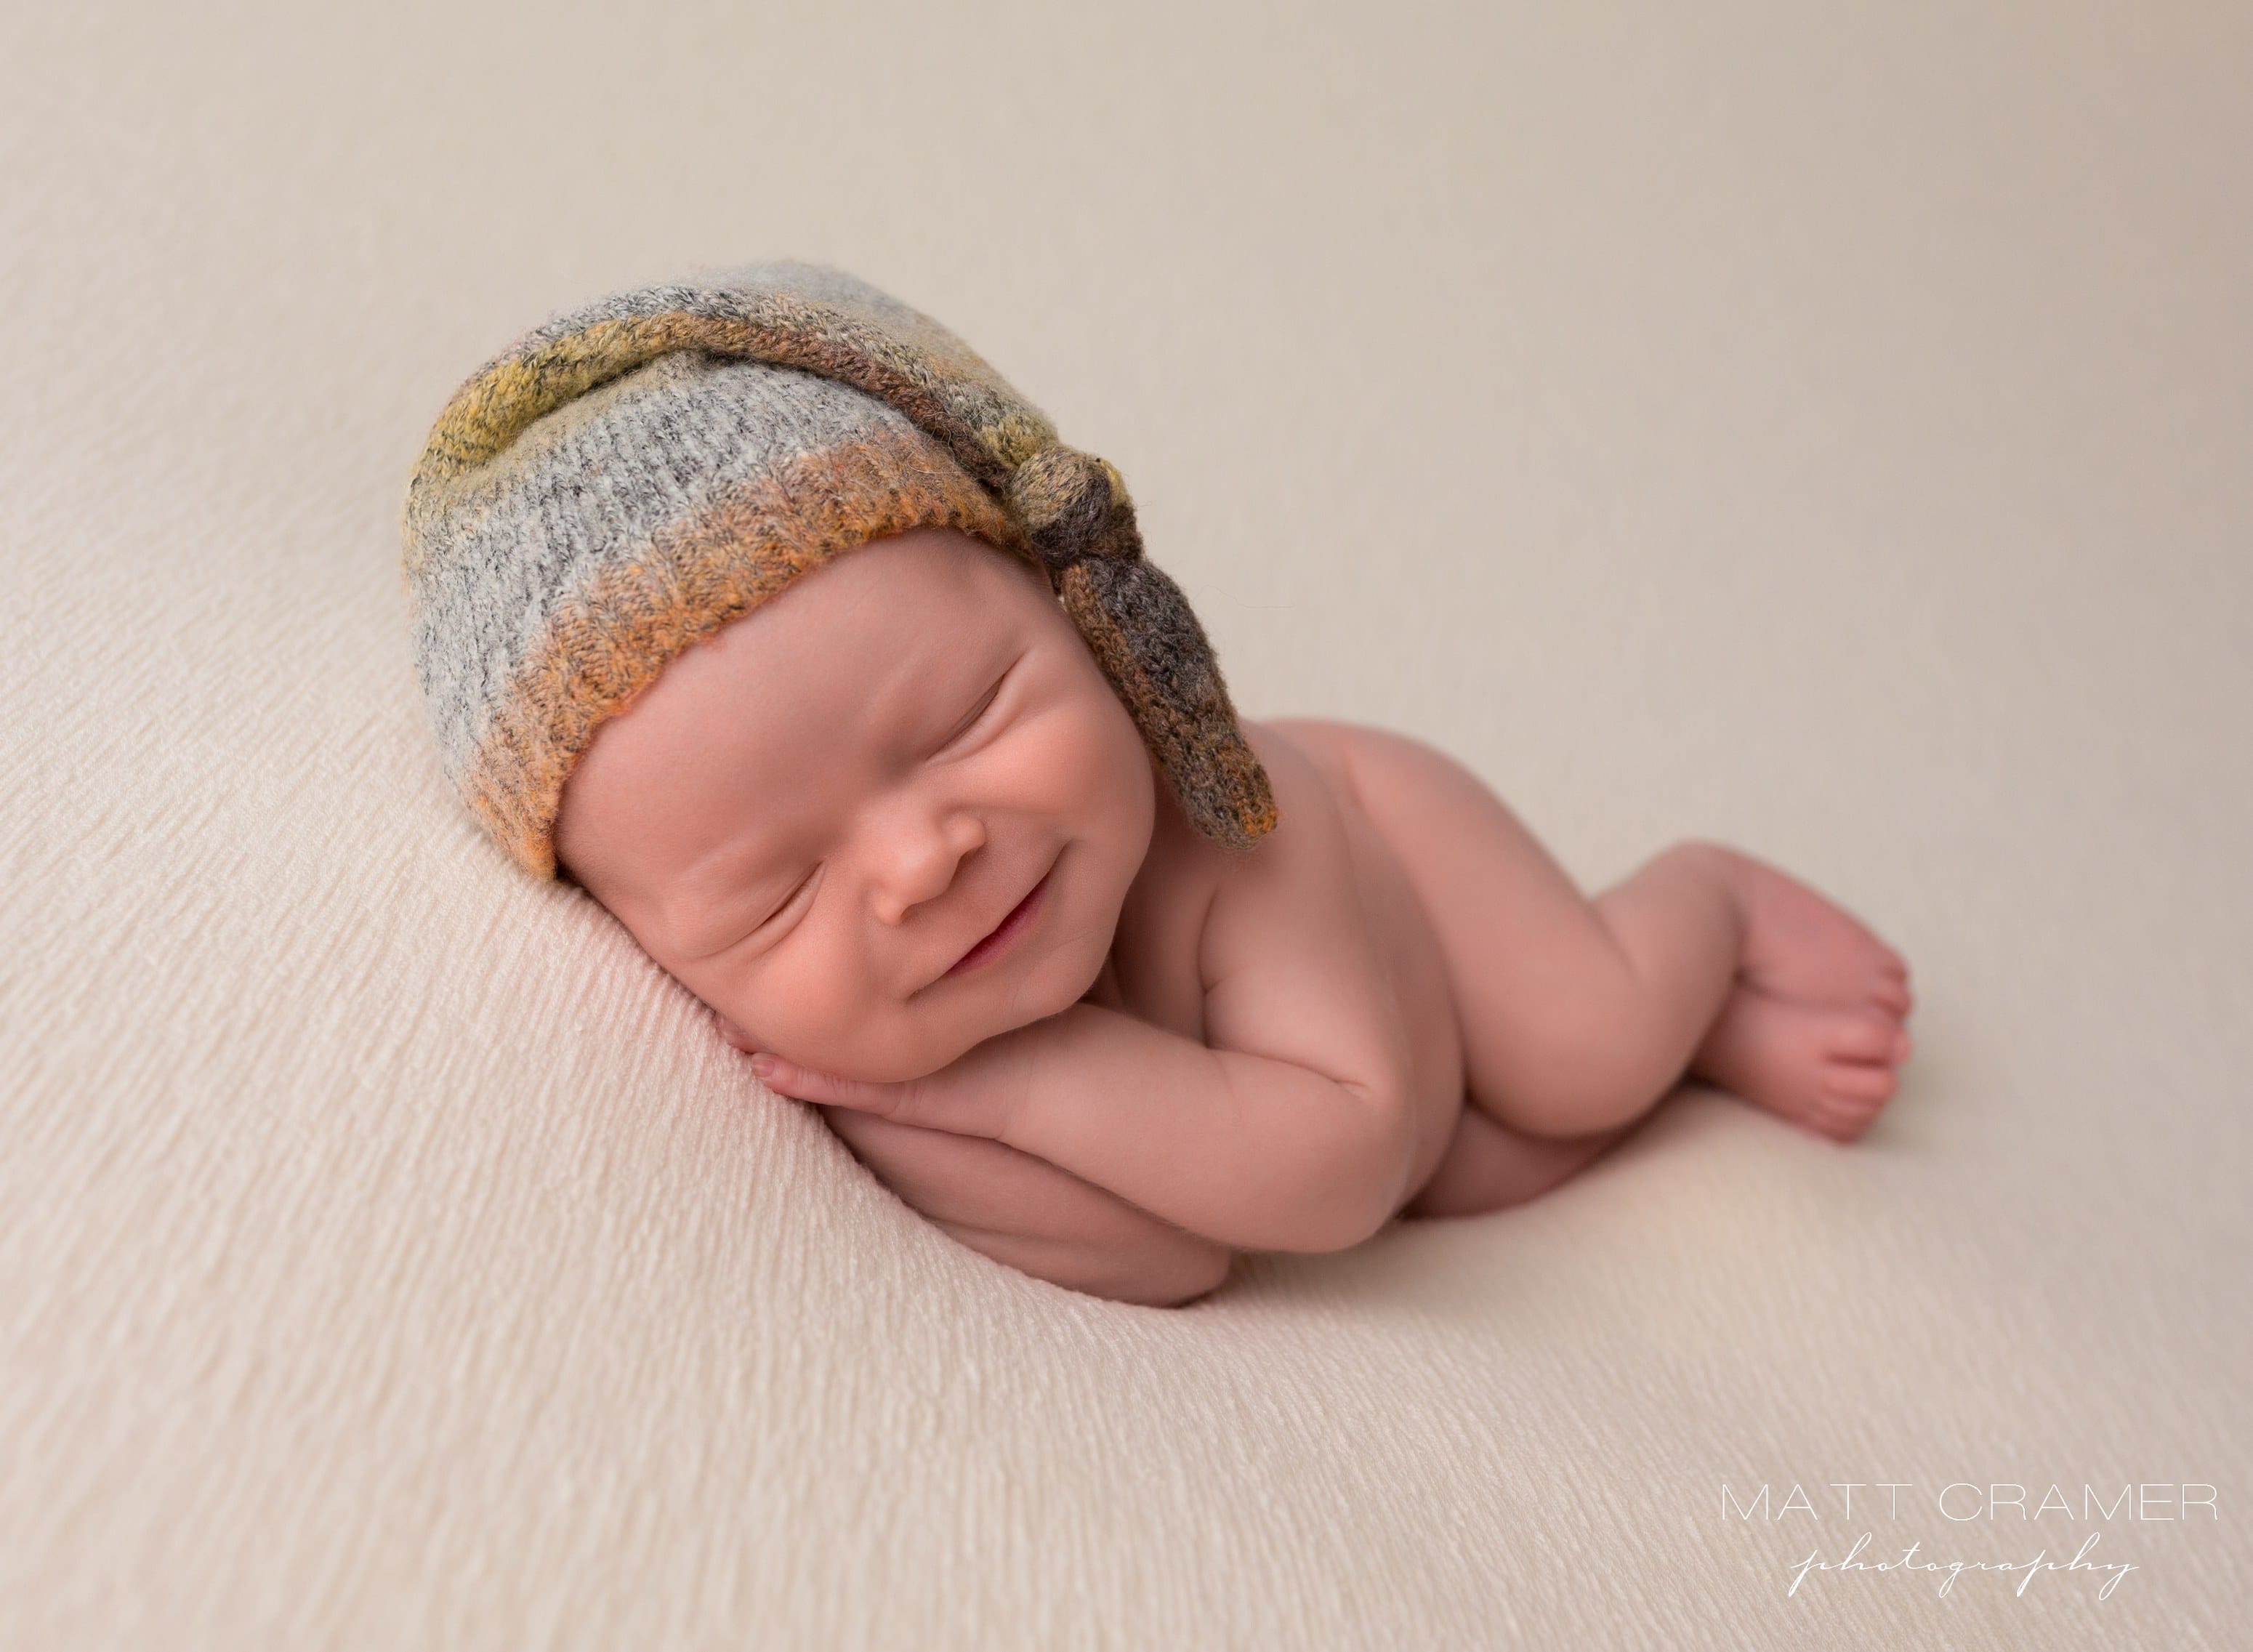 smiling baby boy with hat on laying on his side during a newborn photo shoot